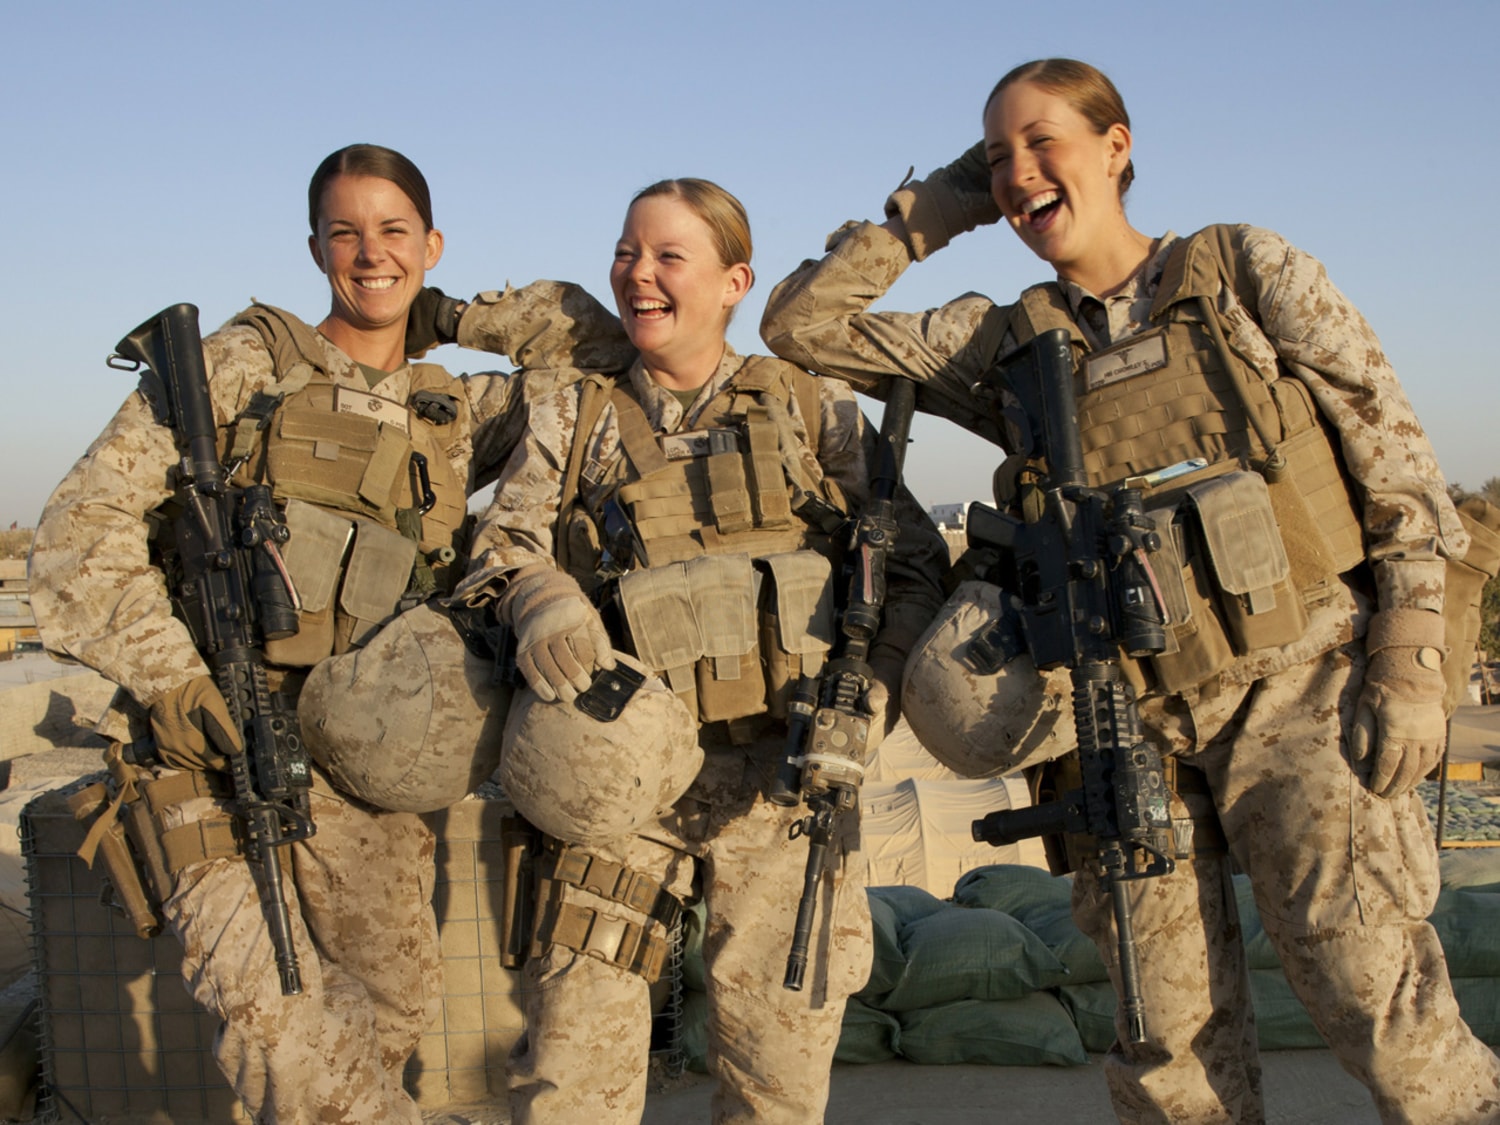 The right's reaction to the prospect of women in combat